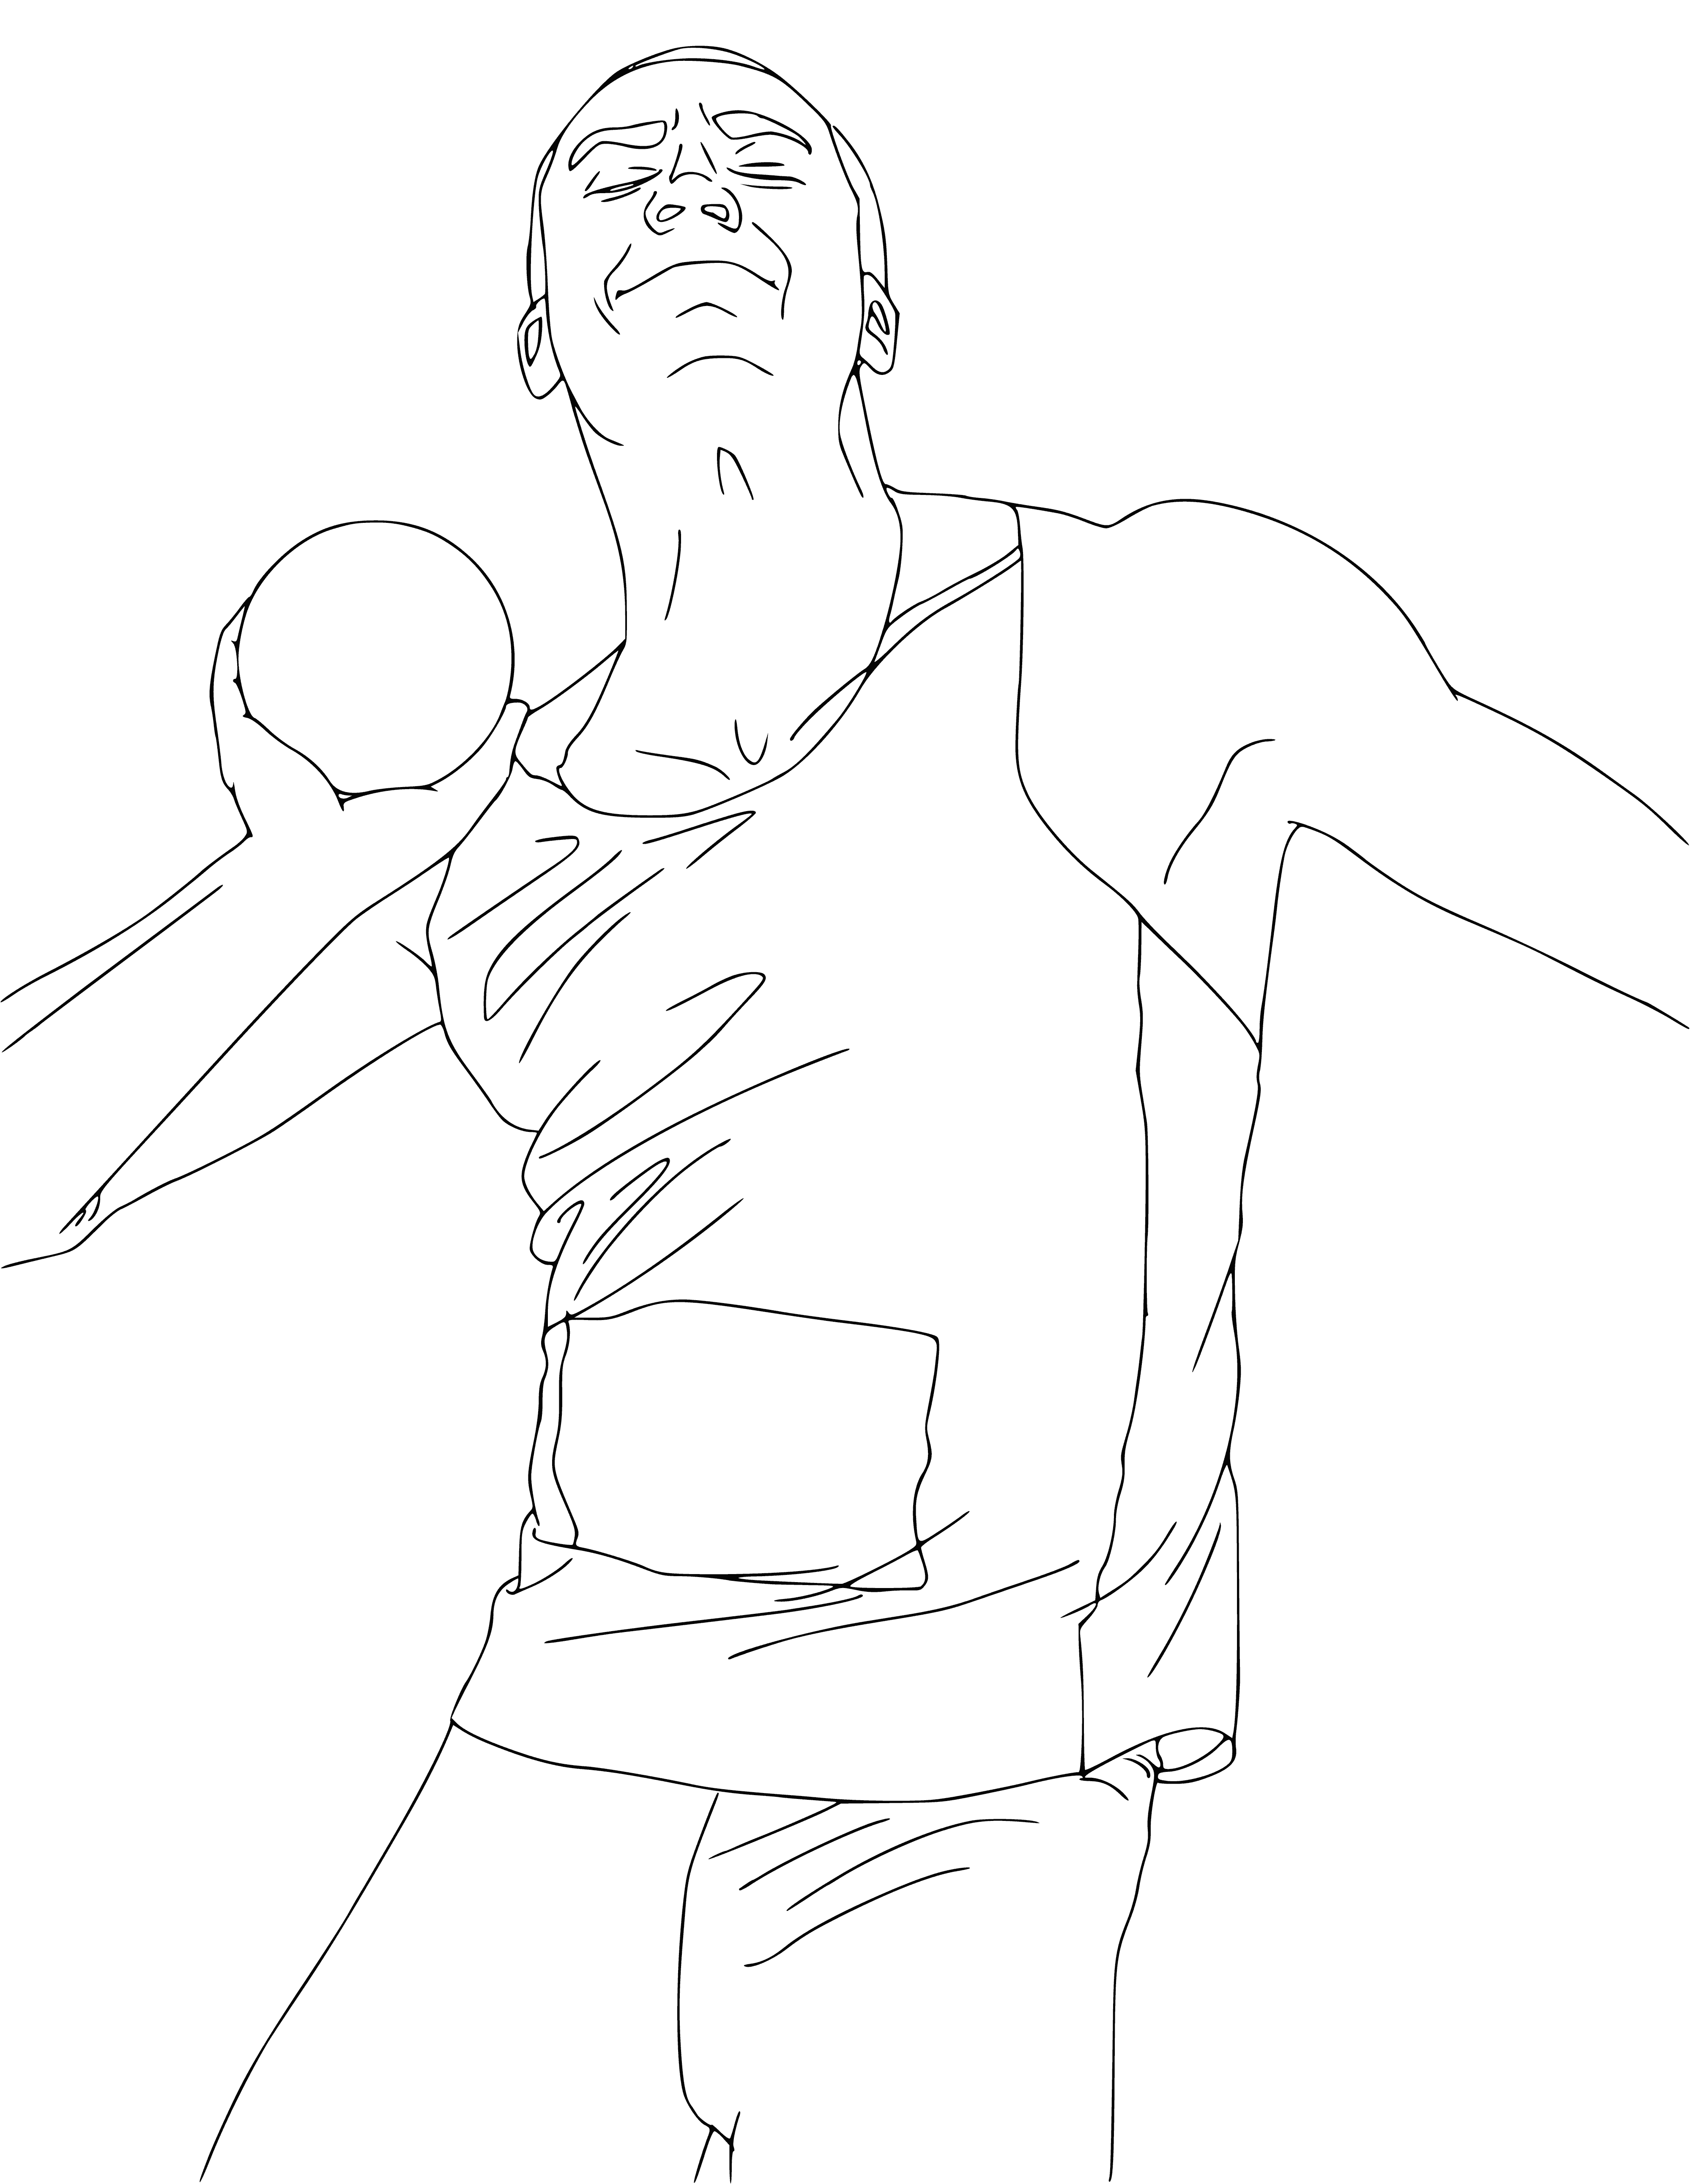 Athletics. Throwing the core coloring page